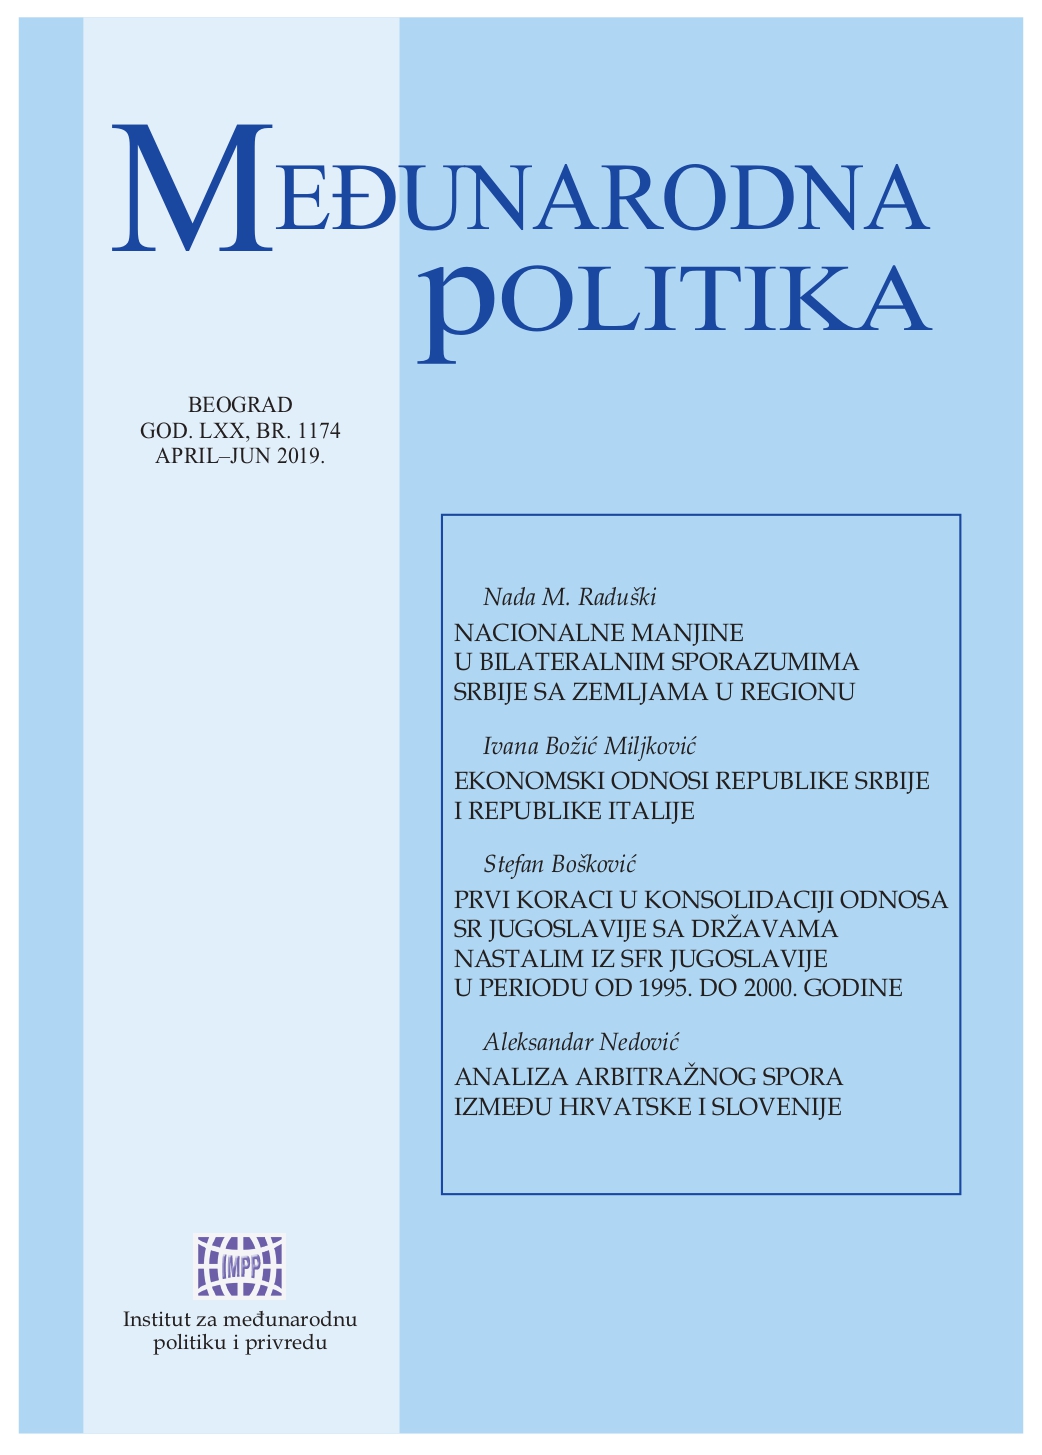 First steps in consolidation of the relations between the Federal Republic of Yugoslavia and new states emerged from Socialist Federative Republic of Yugoslavia between 1995 and 2000 Cover Image